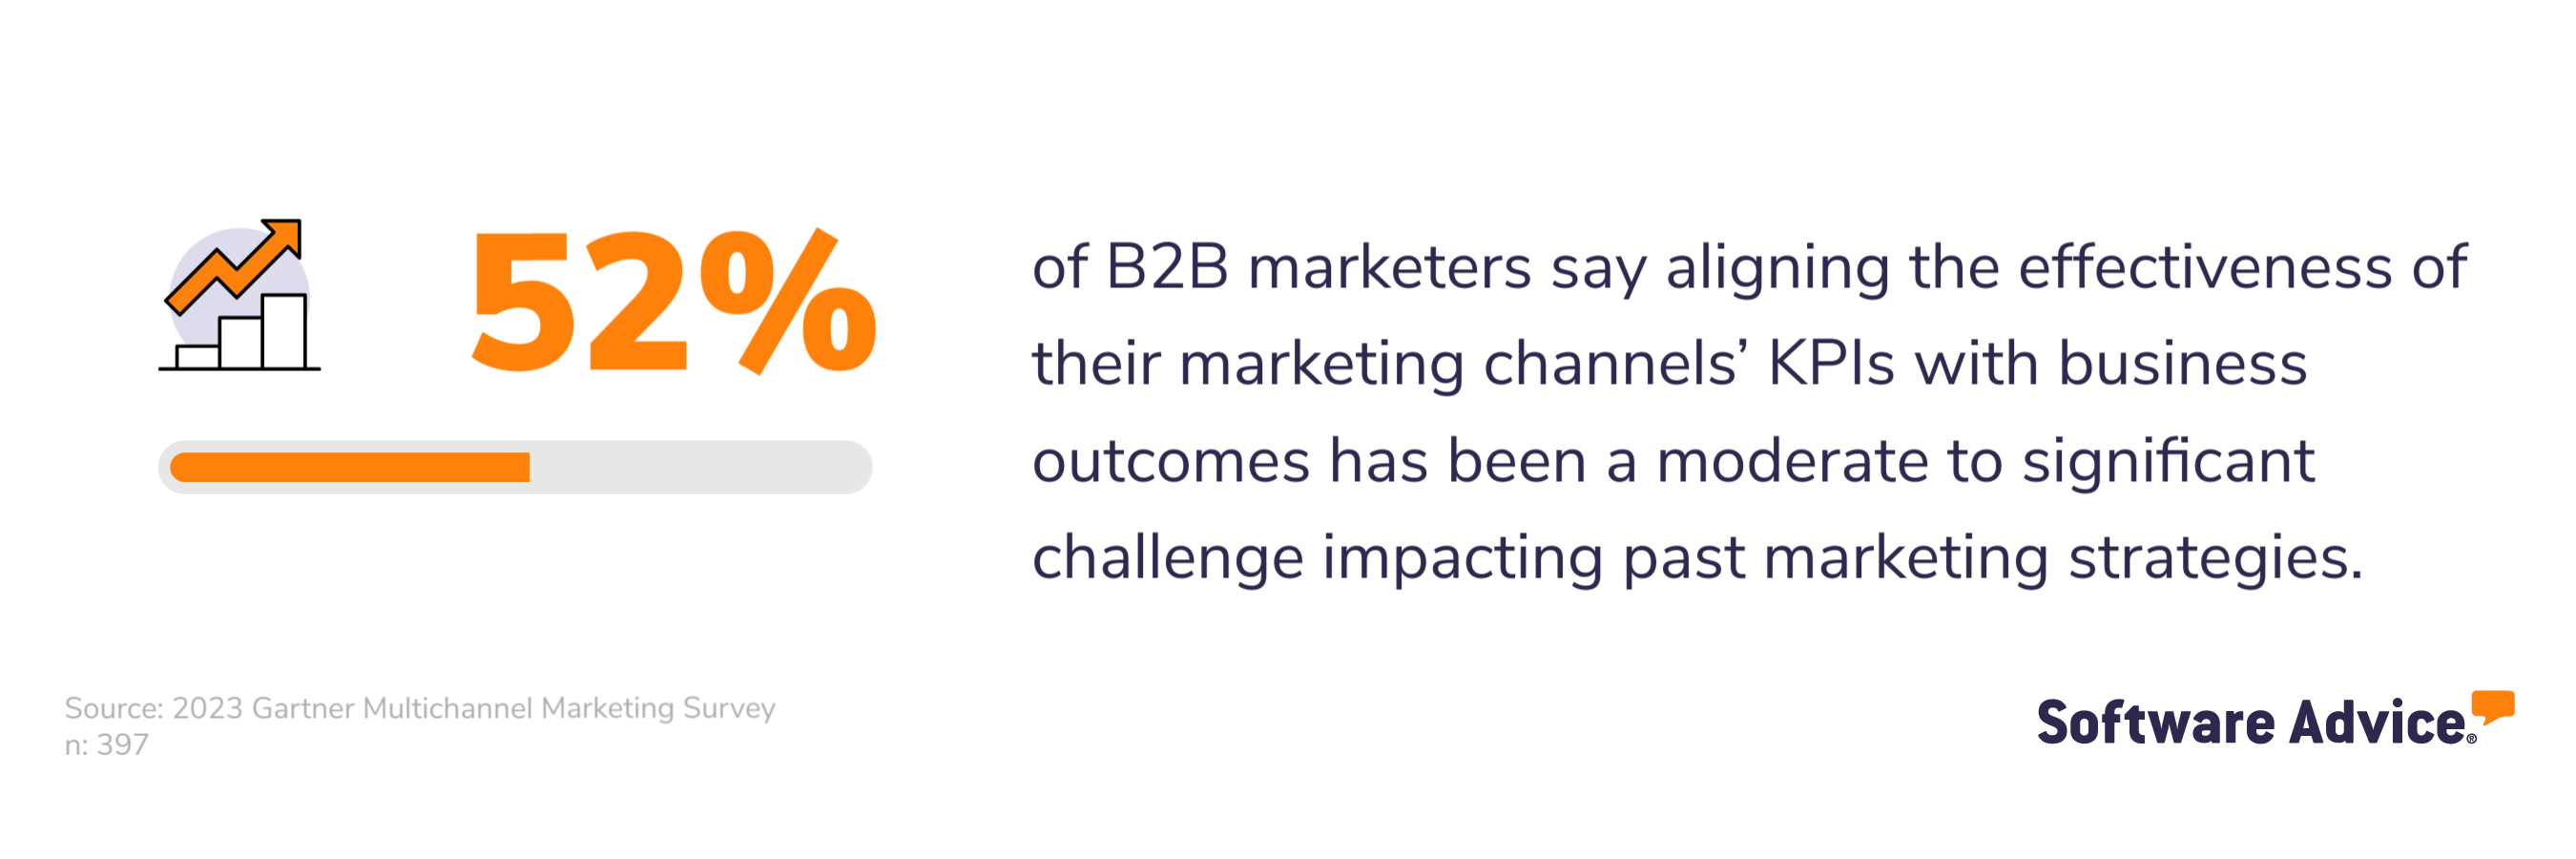 52% of B2B marketers say aligning the effectiveness of their marketing channels’ KPIs with business outcomes has been a moderate to significant challenge impacting past marketing strategies.